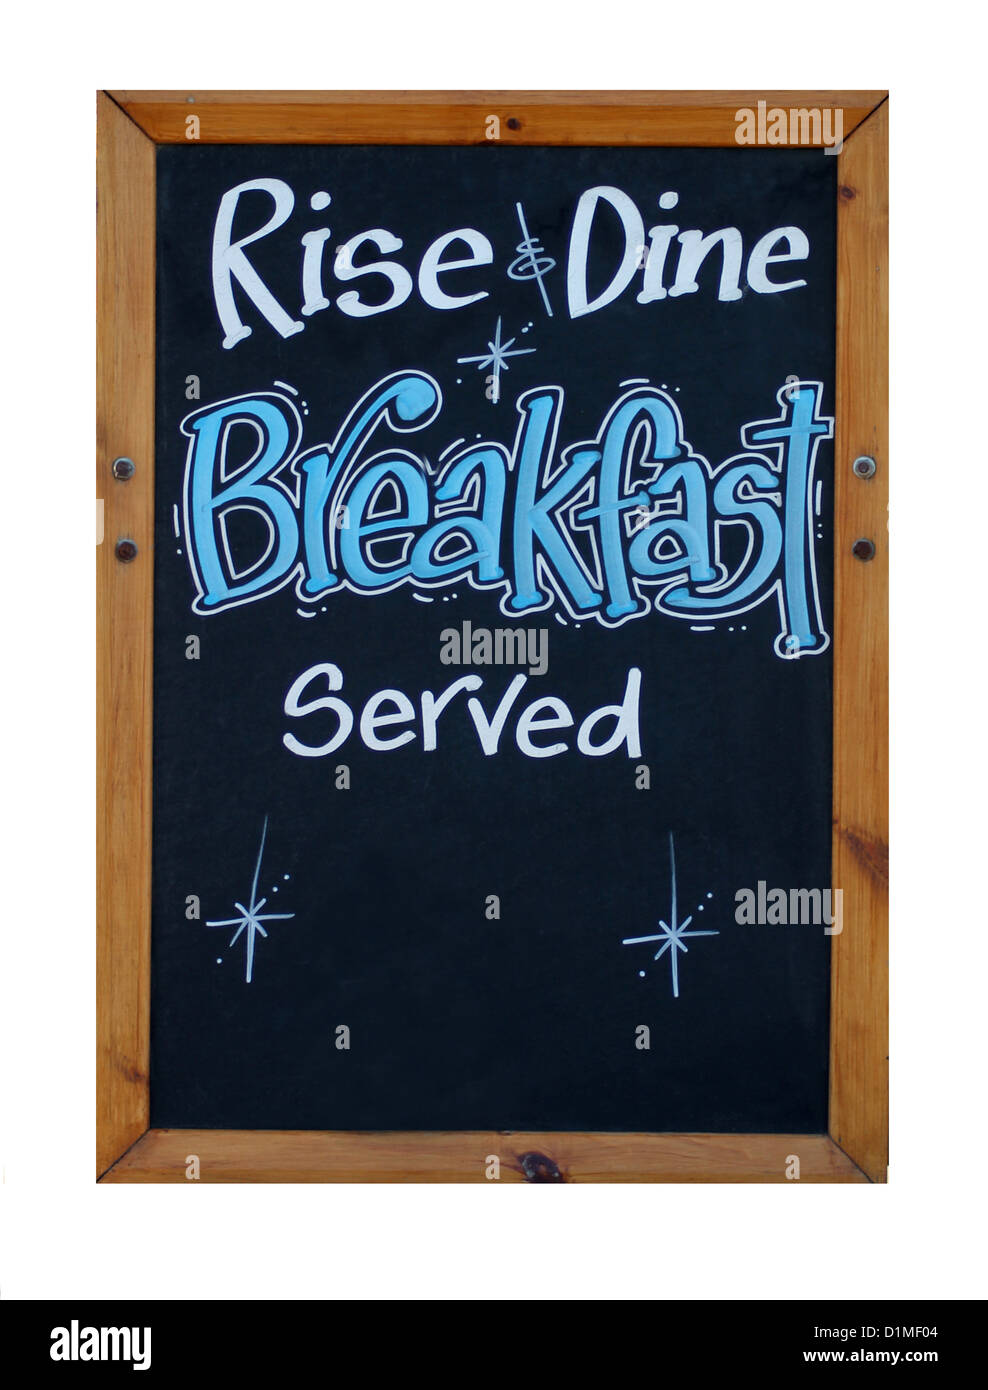 Rise and dine breakfast served sign isolated on white background with copy space. Stock Photo